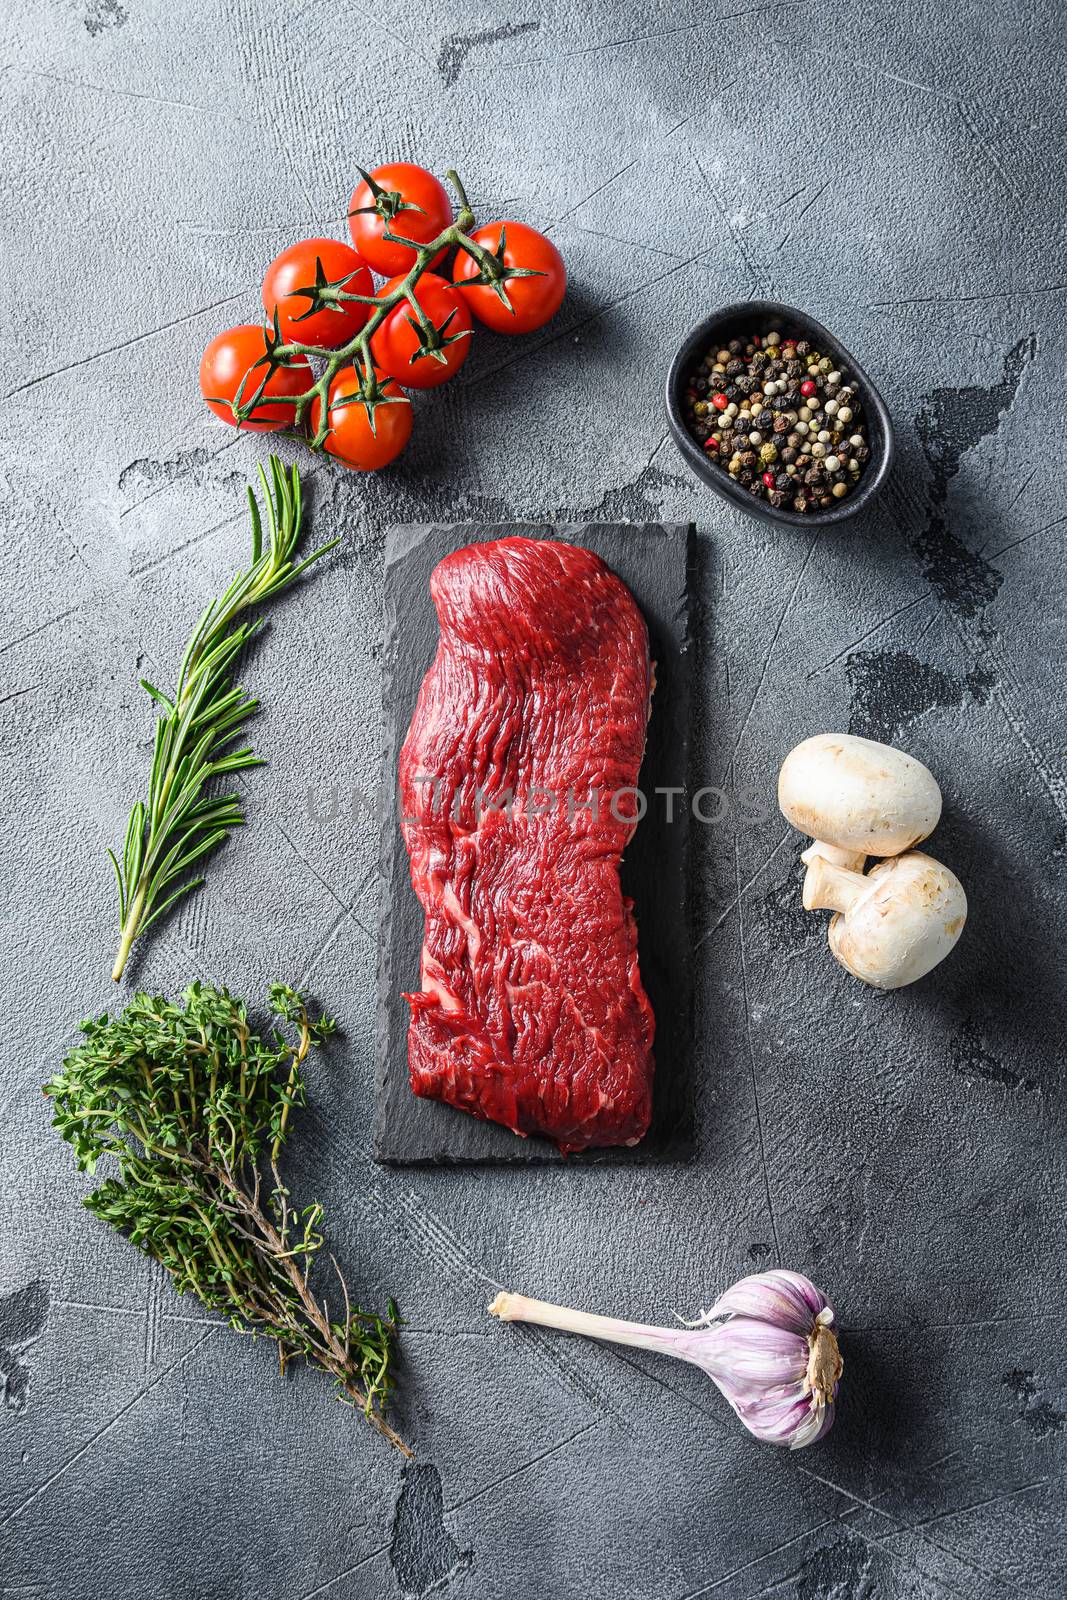 Organic Tri-tip, triangle roast marbled beef on black plate , marbled beef with herbs tomatoes peppercorns over grey stone surface background top view by Ilianesolenyi